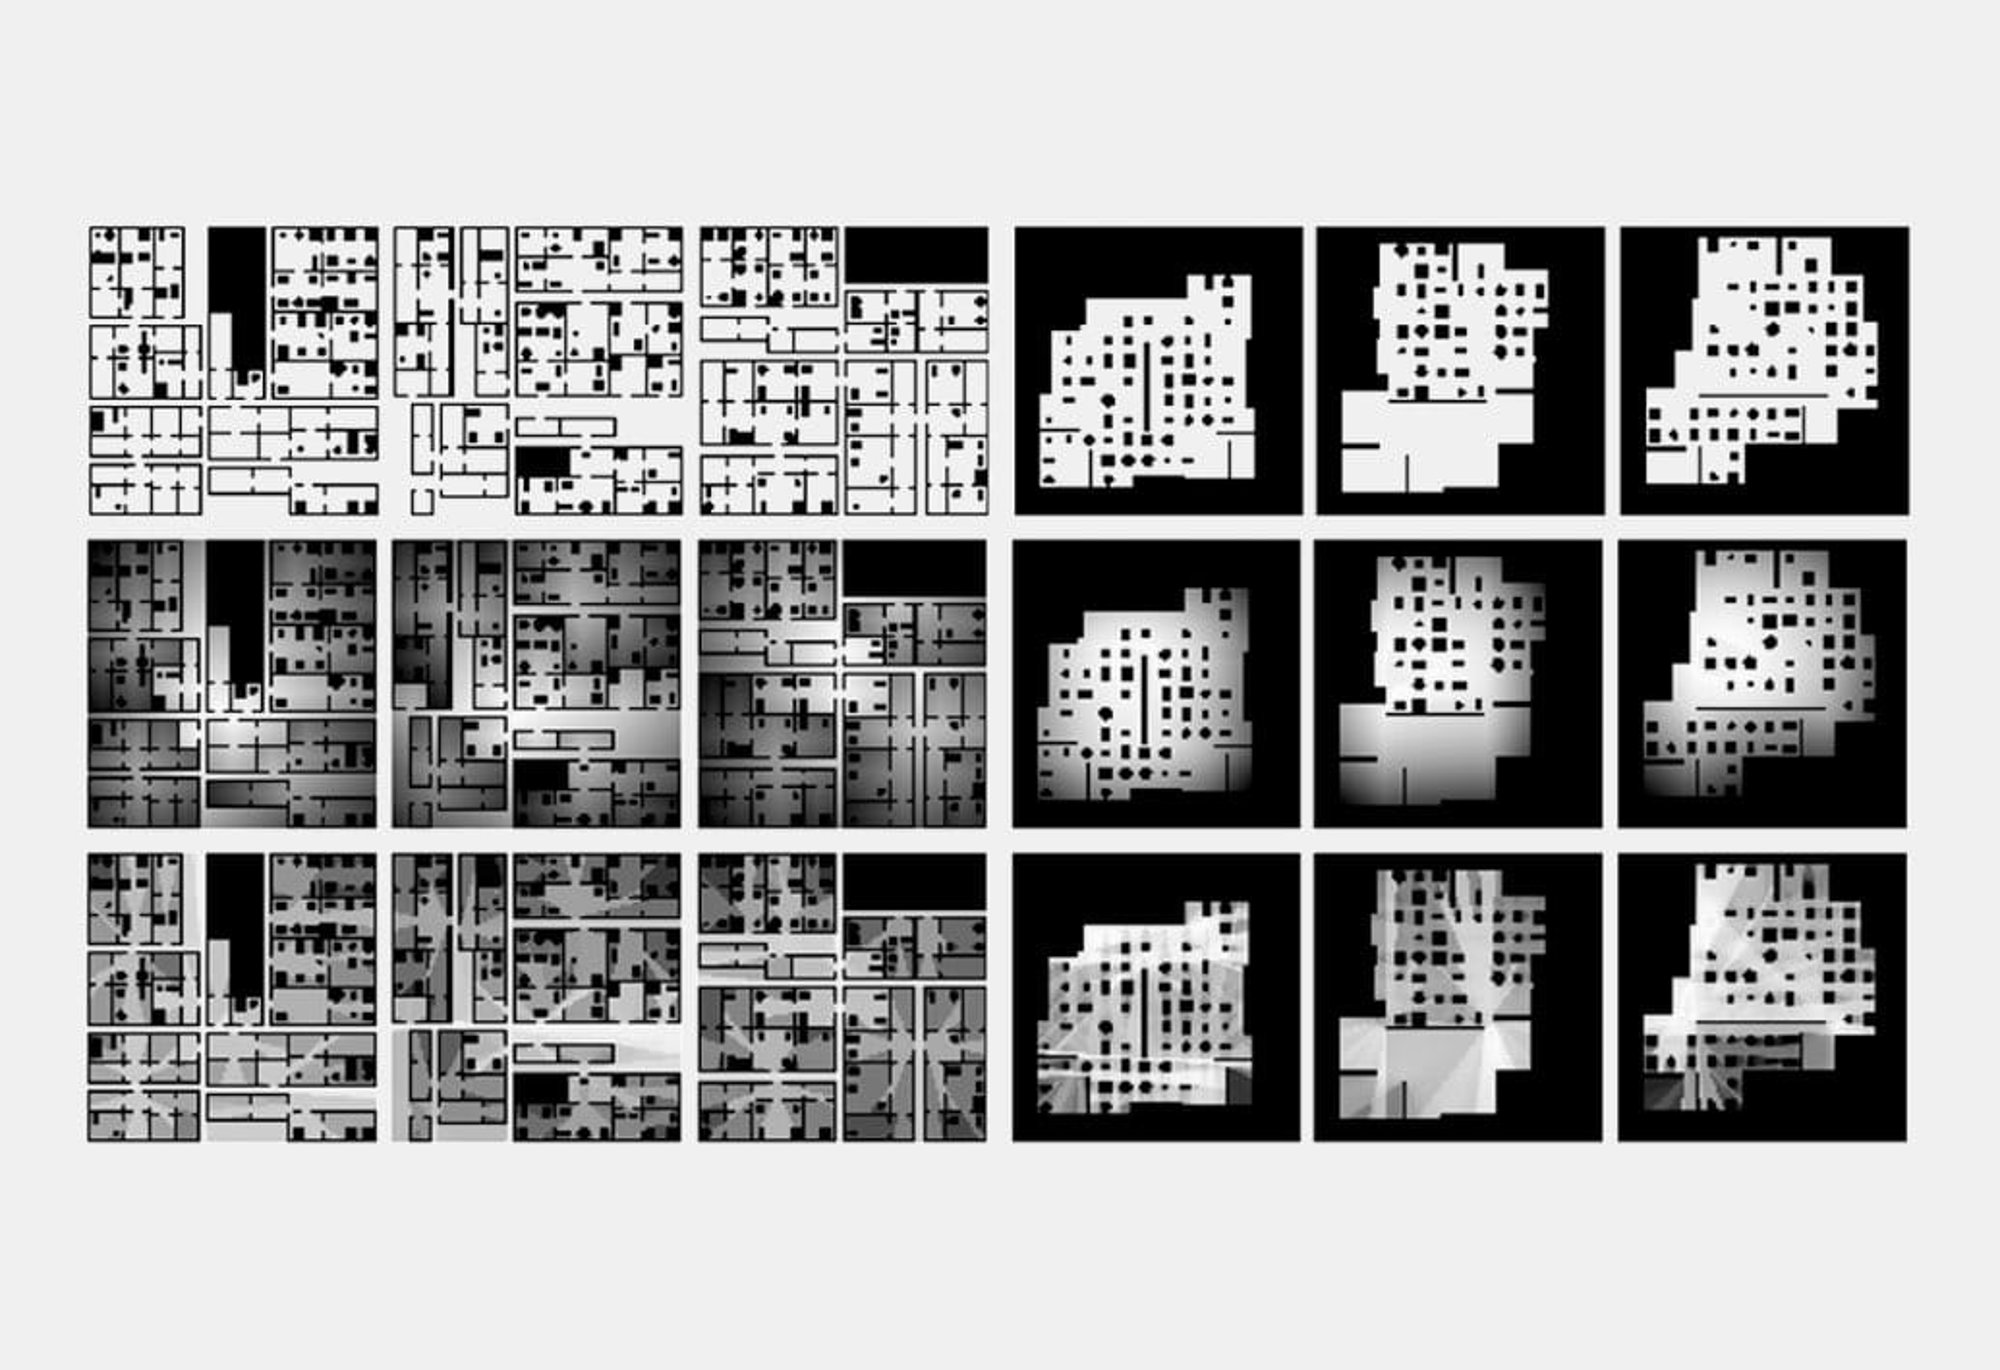 The top row of images shows a sample of floor-plan outputs from the parametric model, showing three compartmentalized (left) and three open-plan work spaces (right). The middle row visualises the output of the spatial connectivity analysis on these floor plans, and bottom row shows the visual connectivity analysis. © Foster + Partners